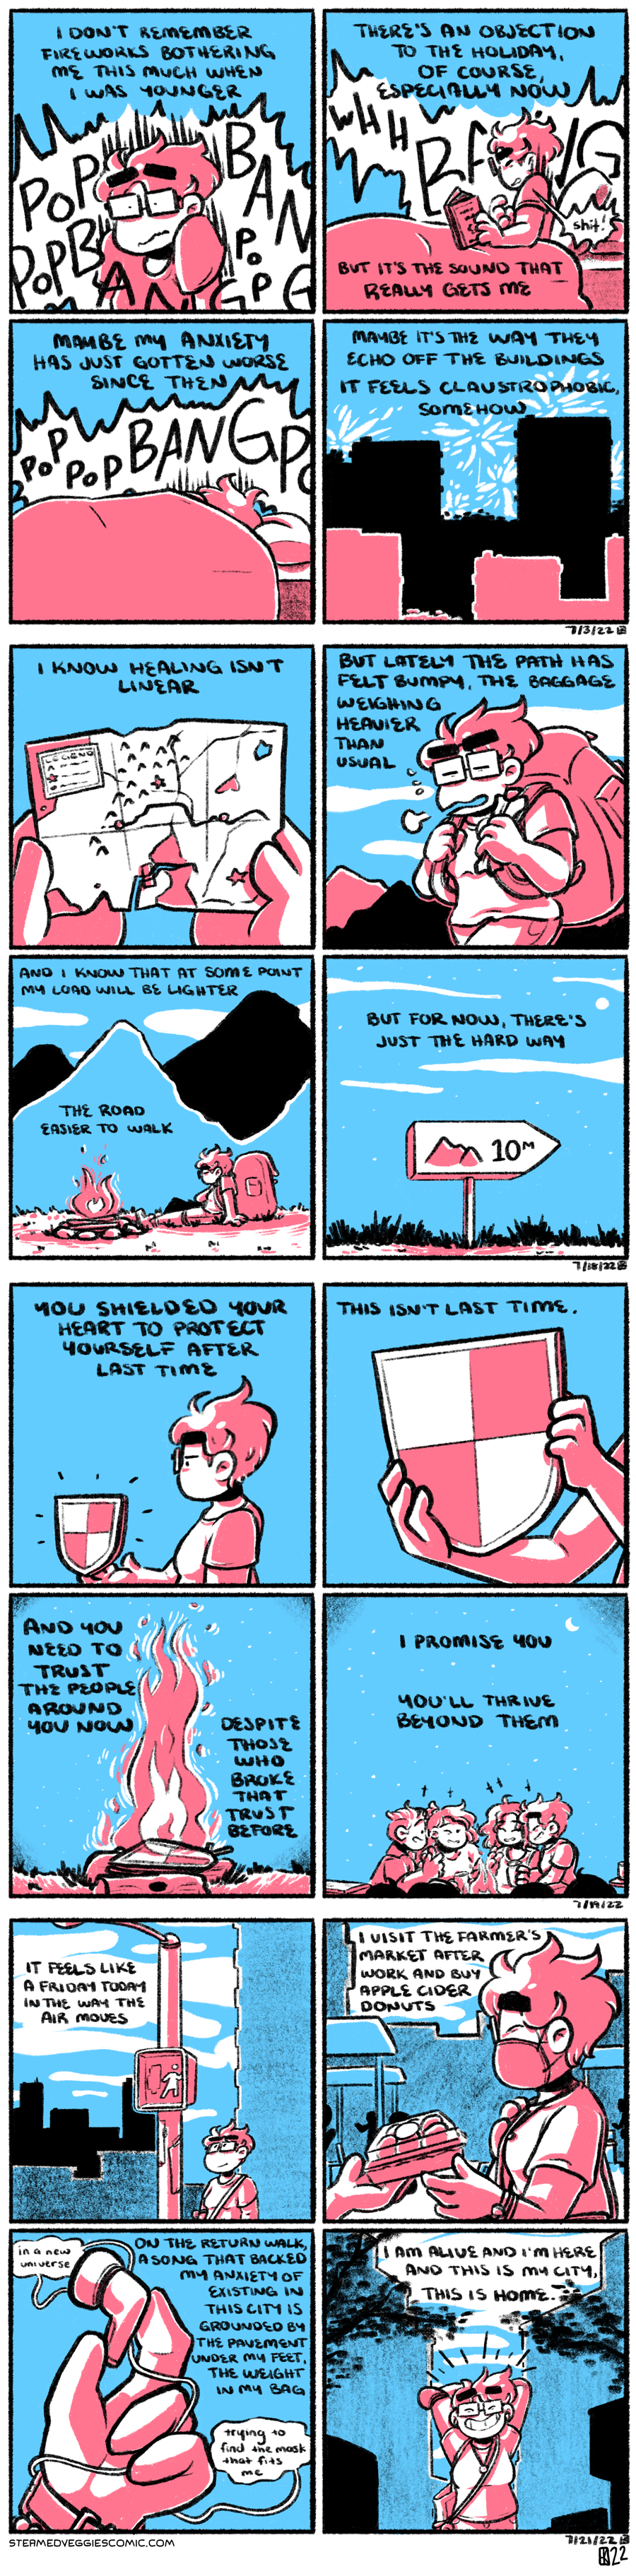 A series of four panel comics, shaded in pink and blue.

Comic one. In the first panel, Emily is seen from the waist-up, looking startled, her shoulders tense and clenched. Huge sound effect bubbles surround her of various explosion noises. She begins in narration: “I don’t remember fireworks bothering me this much when I was younger.” In the second panel, she sits in bed, similarly tense, clutching at her chest with her right hand and holding a book in her left. The explosions sounds grow larger. “There’s an objection to the holiday, of course, especially now. But it’s the sound that really gets me,” she continues. In the third panel, she is now hunched under the covers, with only the top of her head visible, but still quite shaken as the sounds don’t stop. “Maybe my anxiety has just gotten worse since then,” she considers. In the fourth panel, we zoom out, and see silhouettes of buildings in layers of depth. Fireworks are visible in the sky. “Maybe it’s the way they echo off the buildings. It feels claustrophobic, somehow,” she concludes.

Comic two. In the first panel, two hands hold a tattered and torn map, riddled with holes and held together with masking tape. The narration begins “I know healing isn’t linear.” In the second panel, Emily, a short-haired woman with glasses, hefts a backpack nearly double her size across the landscape. Mountains and wispy clouds are seen in the background. The narration continues, “But lately the path has felt bumpy, the baggage weighing heavier than usual.” In the third panel, Emily is now seated on the grass, backpack still on, next to a campfire. Mountains are visible in the background. Emily clearly looks exhausted. Her silent narration observes, “And I know that at some point my load will be lighter, the road easier to walk.” In the final panel, a sign on the path points toward the mountain range. “But for now,” she concludes, “there’s just the hard way.”

Comic three. In the first panel, Emily stands, looking solemn, holding a simple shield in her outstretched hand. Her narration begins: “You shielded your heart to protect yourself after last time.” In the second panel, we zoom in on the shield as Emily clutches it with both hands. She continues, “This isn’t last time.” In the third panel, a bonfire sits in the center of the panel, with flames high and wild. The shield can be seen in the middle of it, on top of the logs. “And you need to trust the people around you know, despite those who broke that trust before,” she declares. In the fourth panel, Emily sits around the fire surrounded by friends, laughing, some visible, others in silhouette. The night sky is clear above them, with a visible moon and stars. She concludes in narration, “I promise you. You’ll thrive beyond them.”

Comic four. In the first panel, Emily stands at a crosswalk, a slight smile on her face. Silhouettes of city buildings dot the background. She begins: “It feels like a Friday today in the way the air moves.” In the second panel, an unseen person hands Emily (now masked) a small box. Vendor stalls can be seen behind her. Emily continues: “I visit the farmer’s market after work and by apple cider donuts.” In the third panel, we zoom in on a hand holding an airpod. Out of it, lyrics to The Slow Parts on Death Metal Albums by the Mountain Goats float out: “in a new universe / trying to find the mask that fits me.” Emily muses, “On the return walk, a song that backed my anxiety of existing in this city is grounded by the pavement under my feet, the weight in my bag.” In the last panel, Emily is centered, framed by buildings, arms raised and crossed behind her head, grinning wide. She concludes “I am alive and I’m here and this is my city, this is home.”